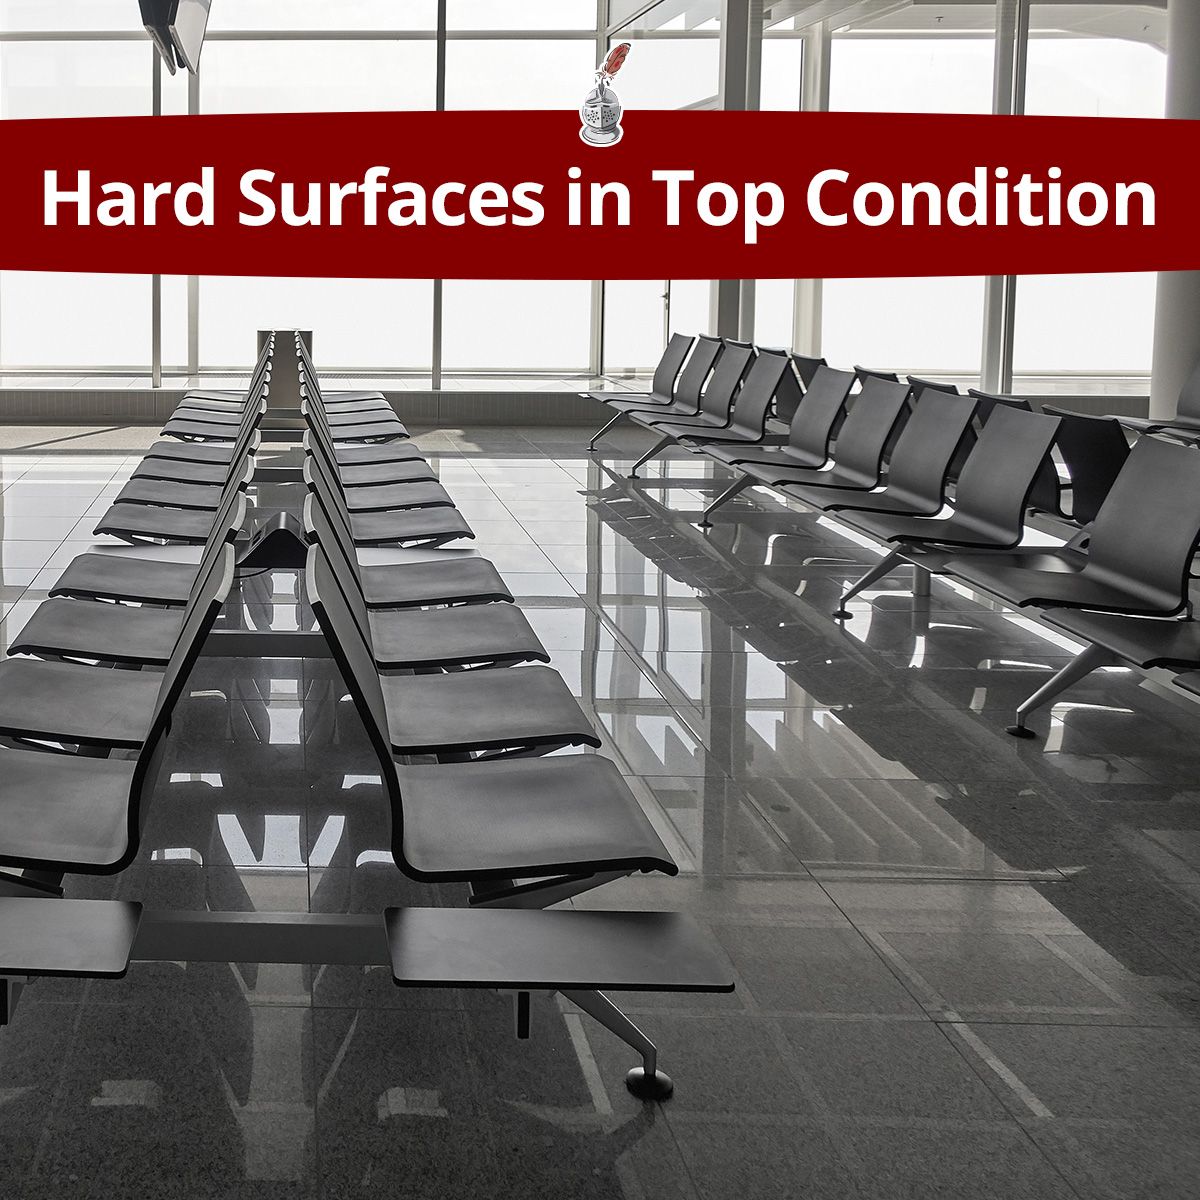 Hard Surfaces in Top Condition